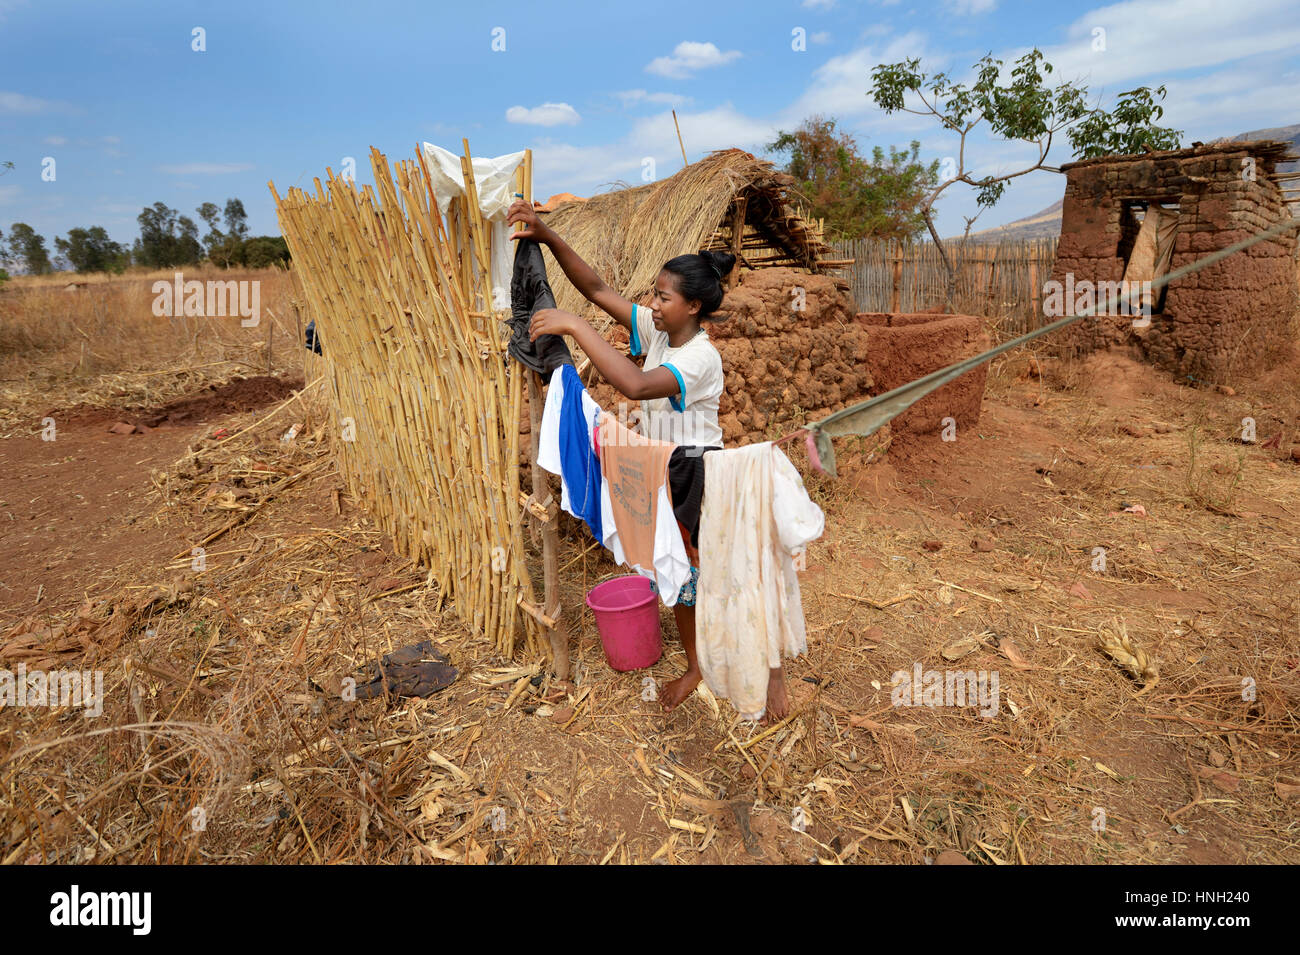 Woman hangs wet clothes on a clothes line, Analakely village, Tanambao commune, Tsiroanomandidy district, Bongolava region Stock Photo